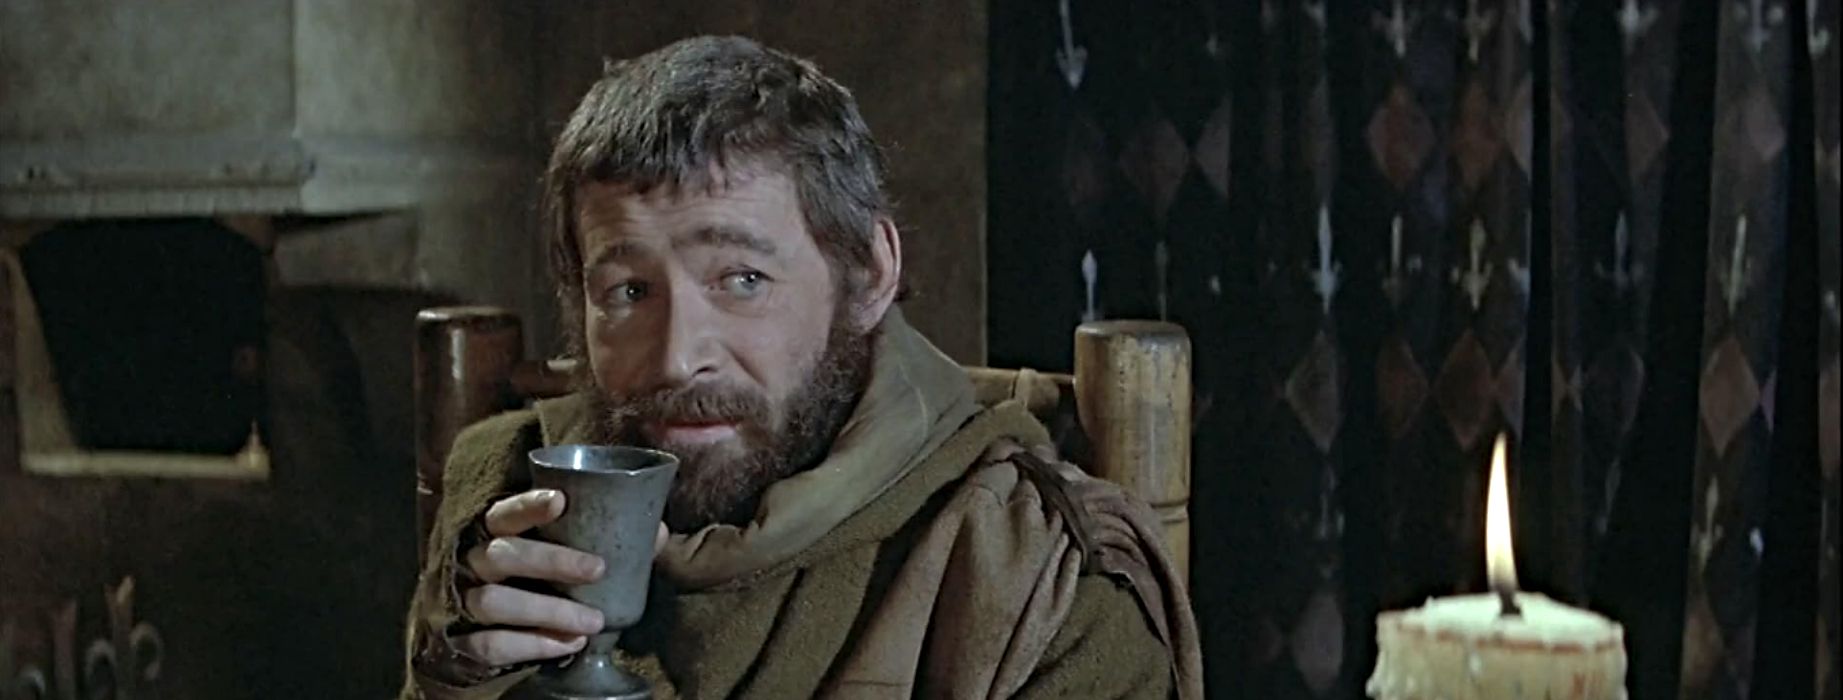 Peter O'Toole as Henry II looking snarky and drinking in The Lion in Winter